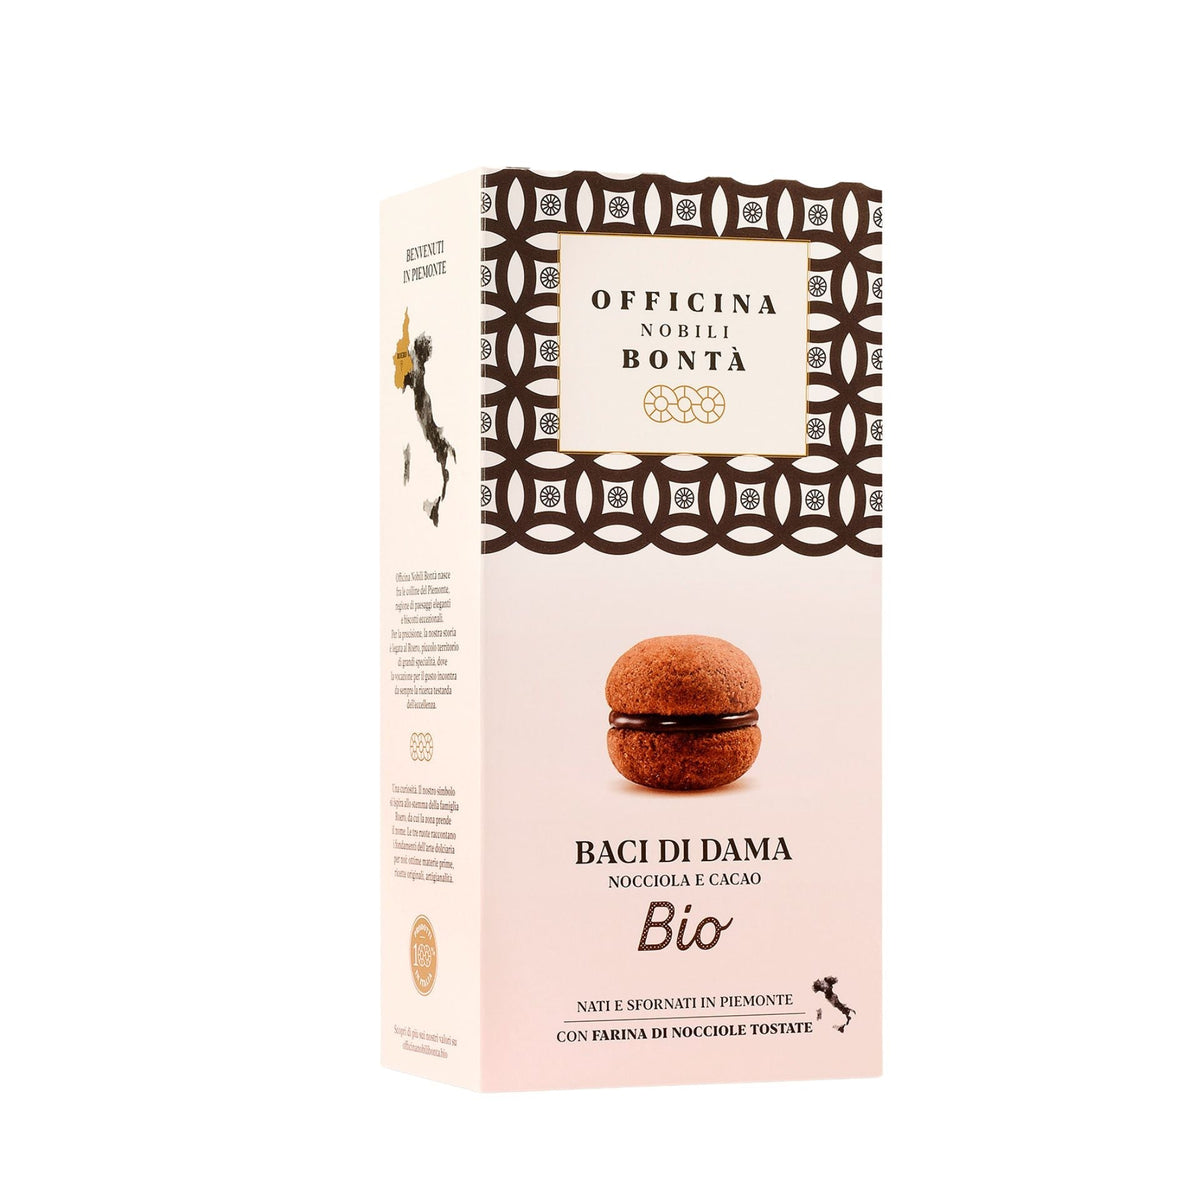 Officina Nobili Bonta Organic Hazelnut &amp; Chocolate Baci di Dama Biscuit 180g (Box)  | Imported and distributed in the UK by Just Gourmet Foods